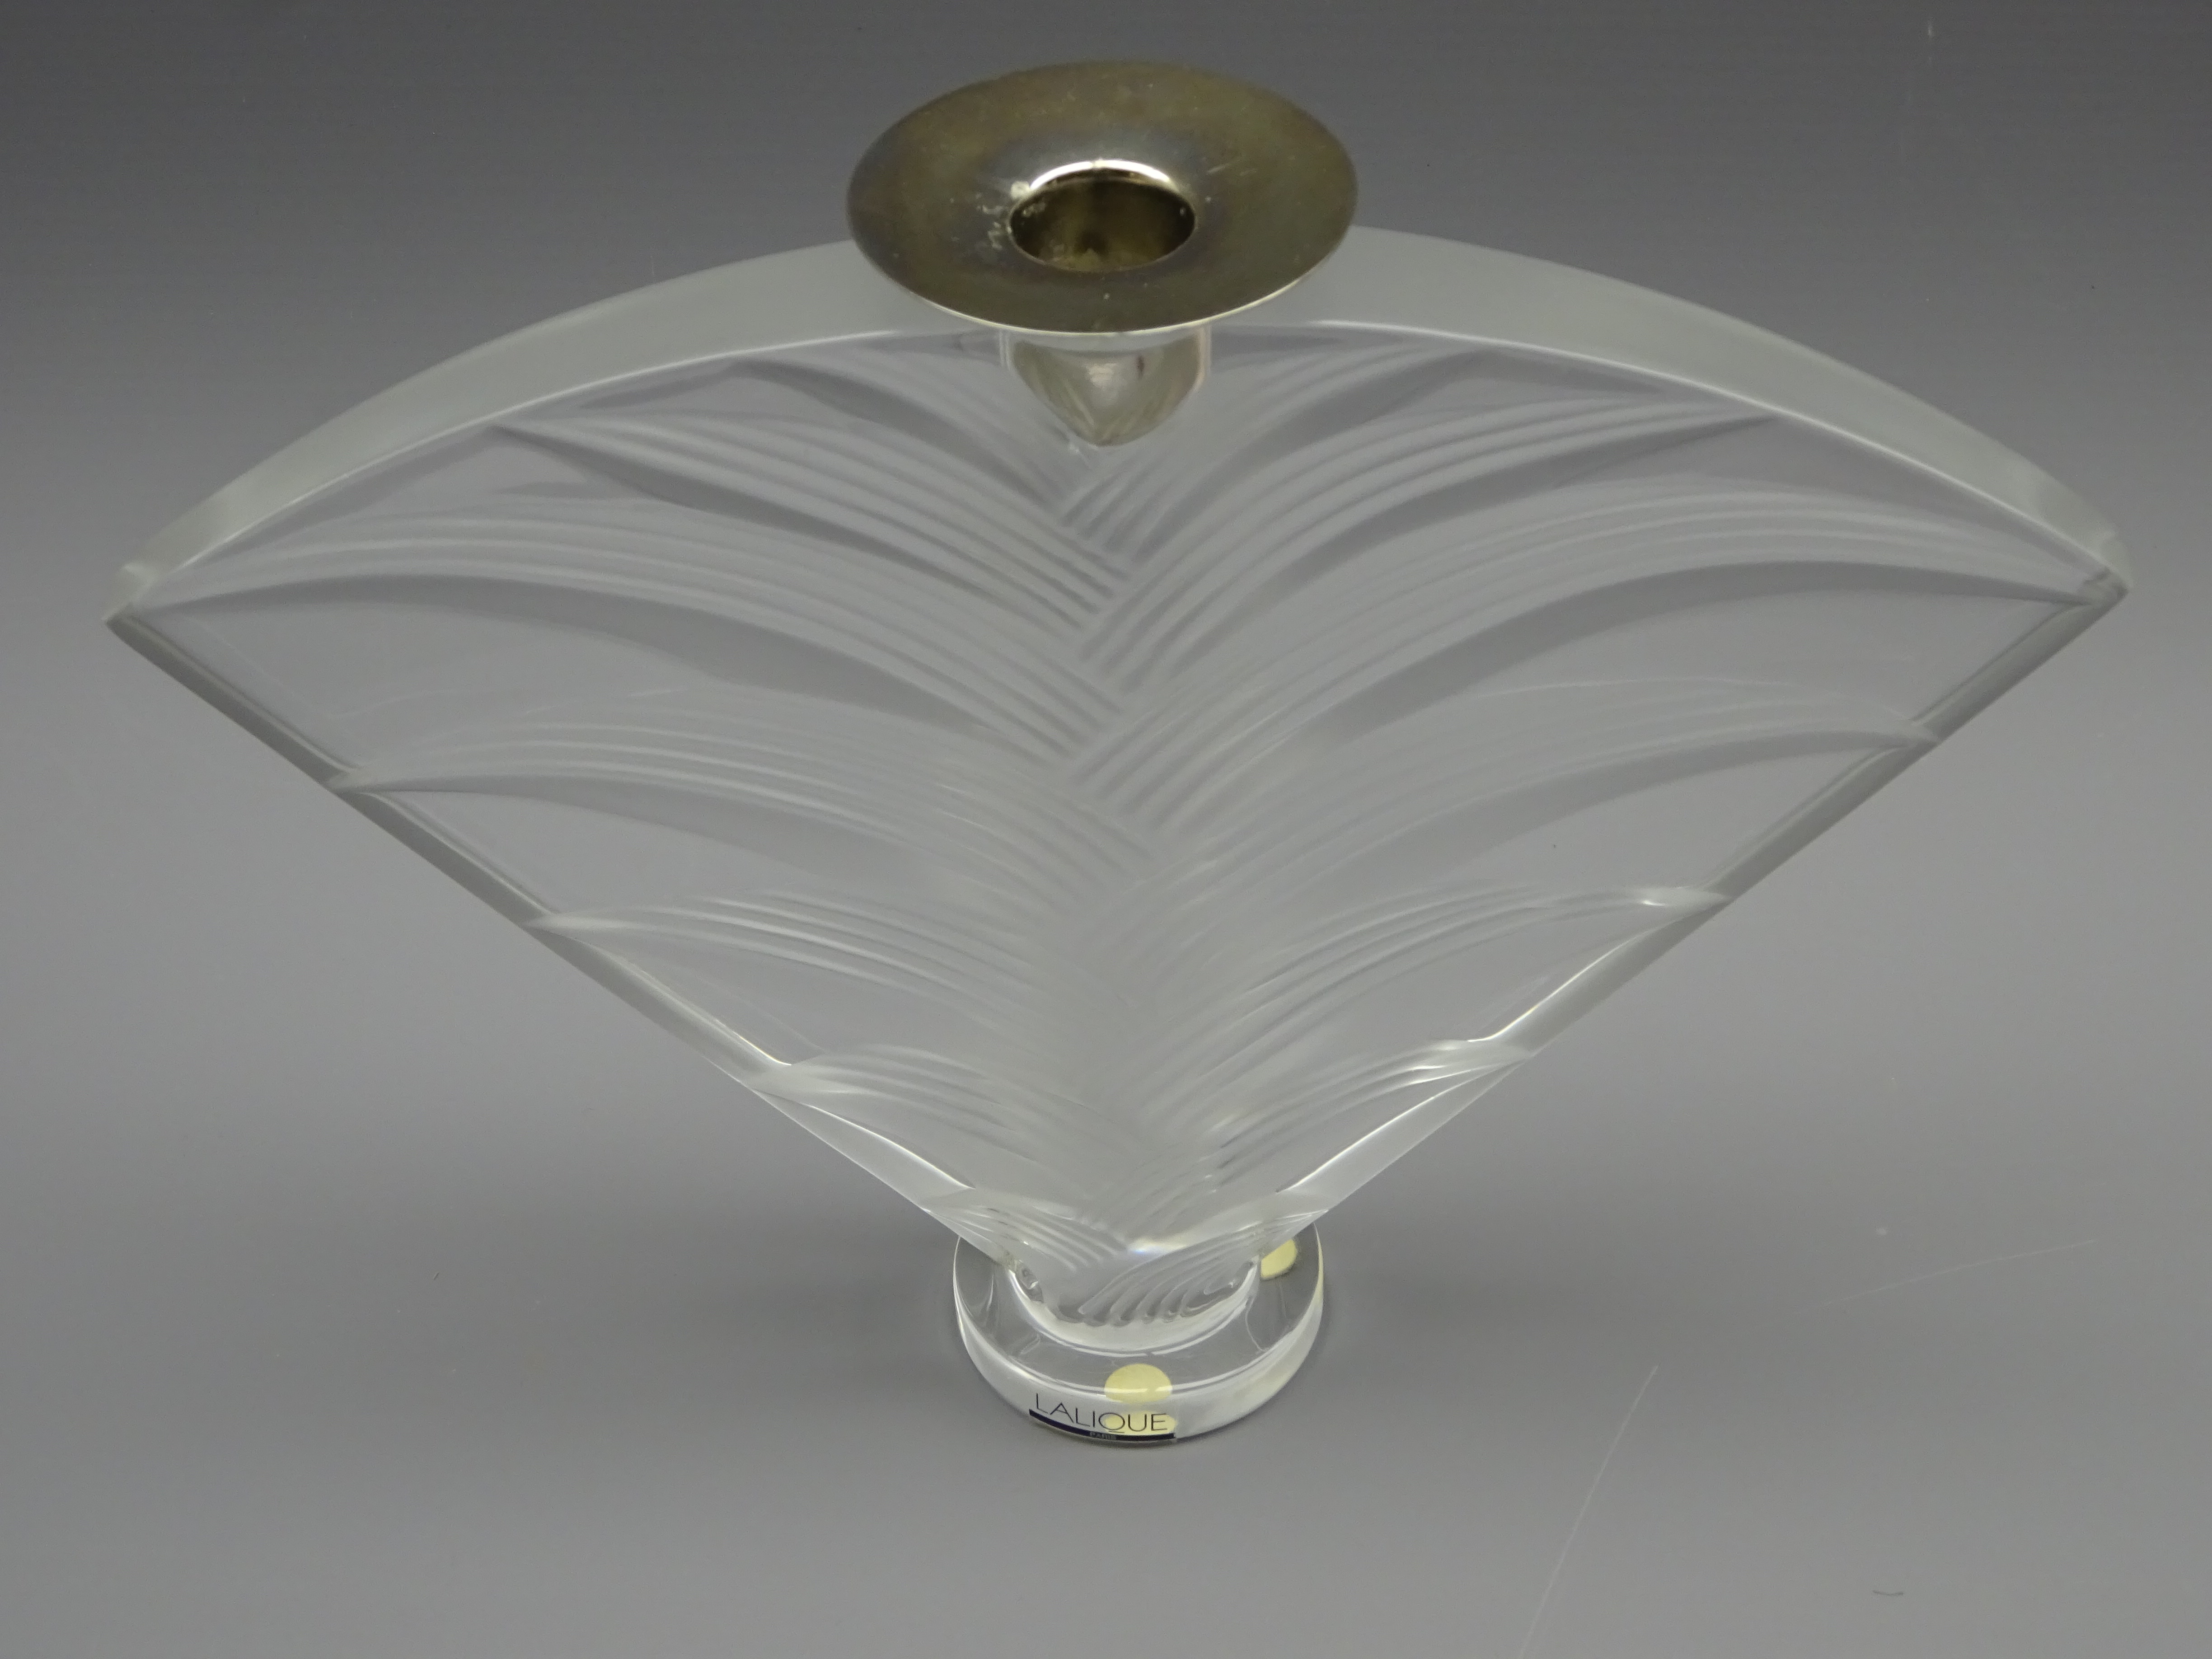 Lalique frosted glass candlestick in the 'Ravelana' design, signed and complete with label, - Image 2 of 2